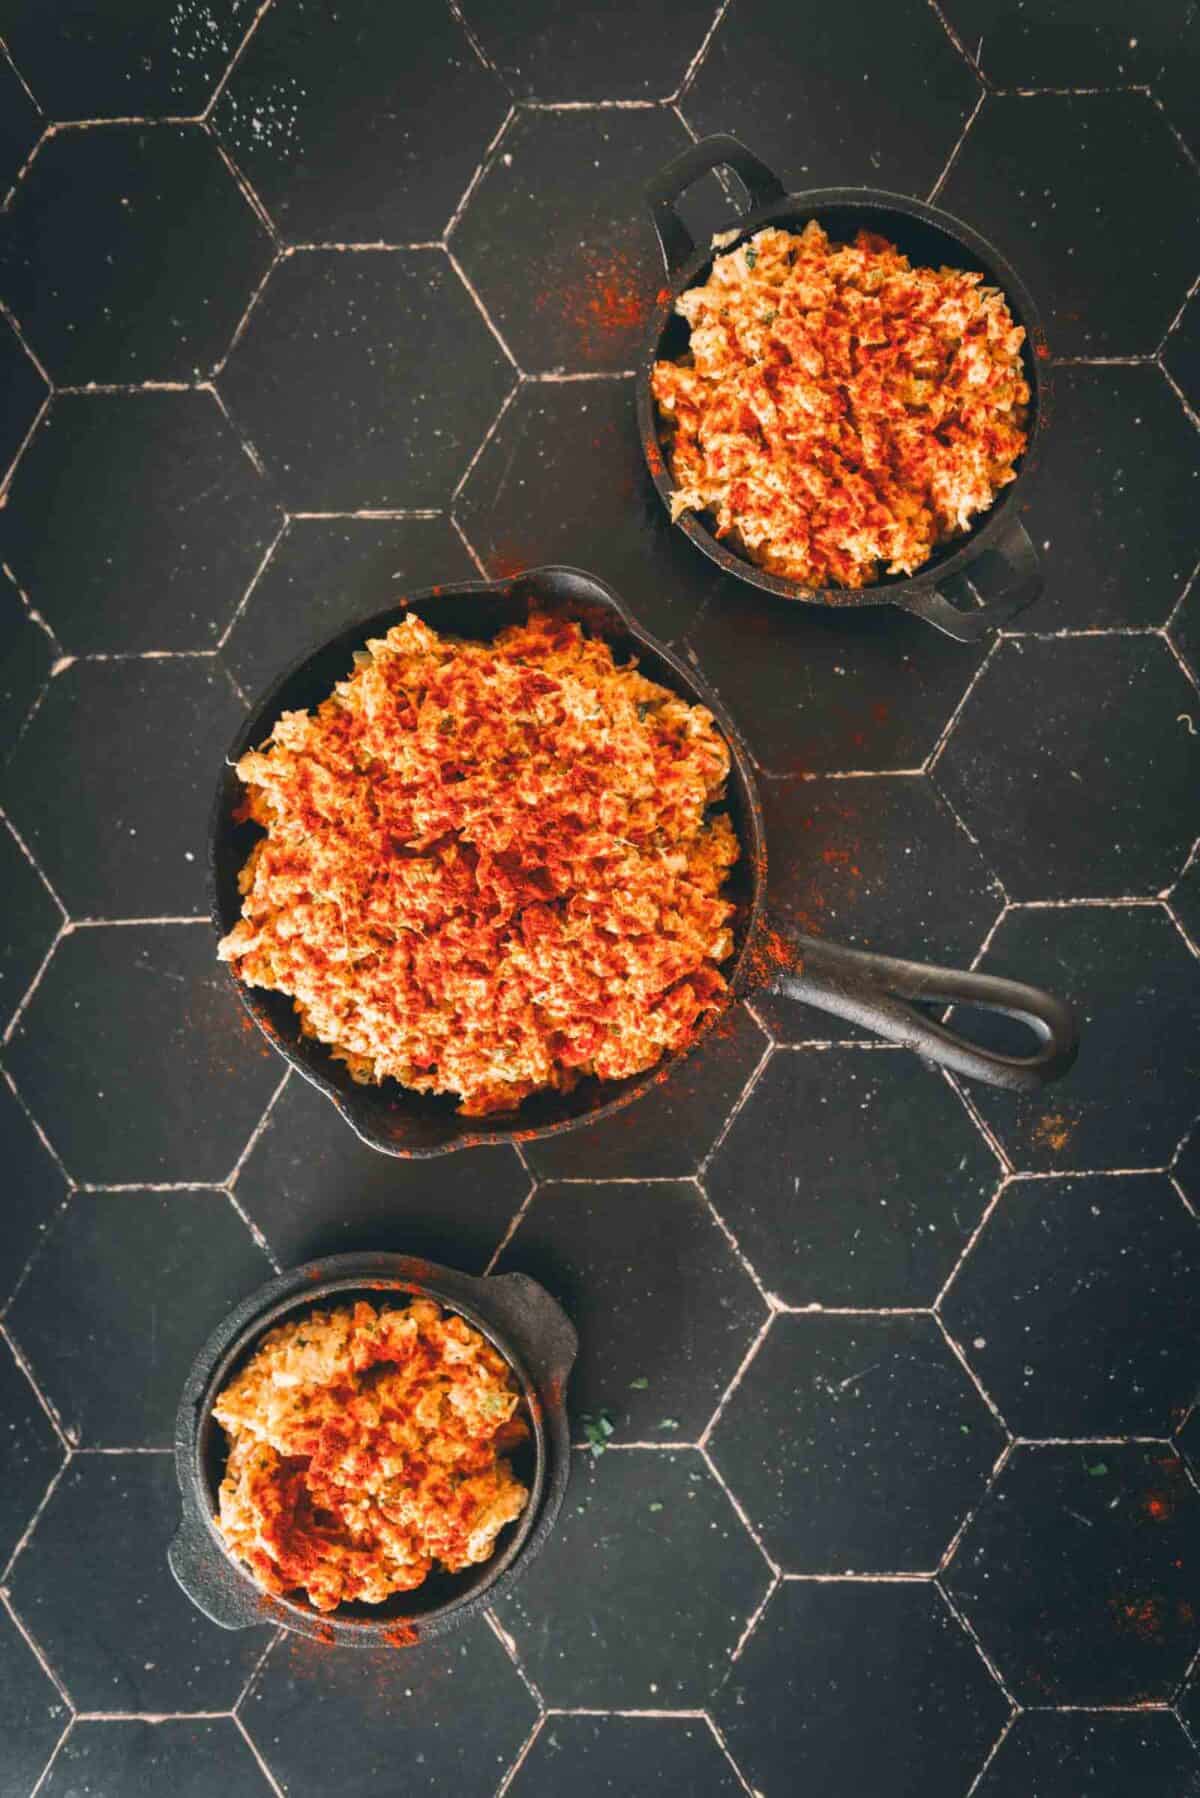 Skillets filled with the crab stuffing.